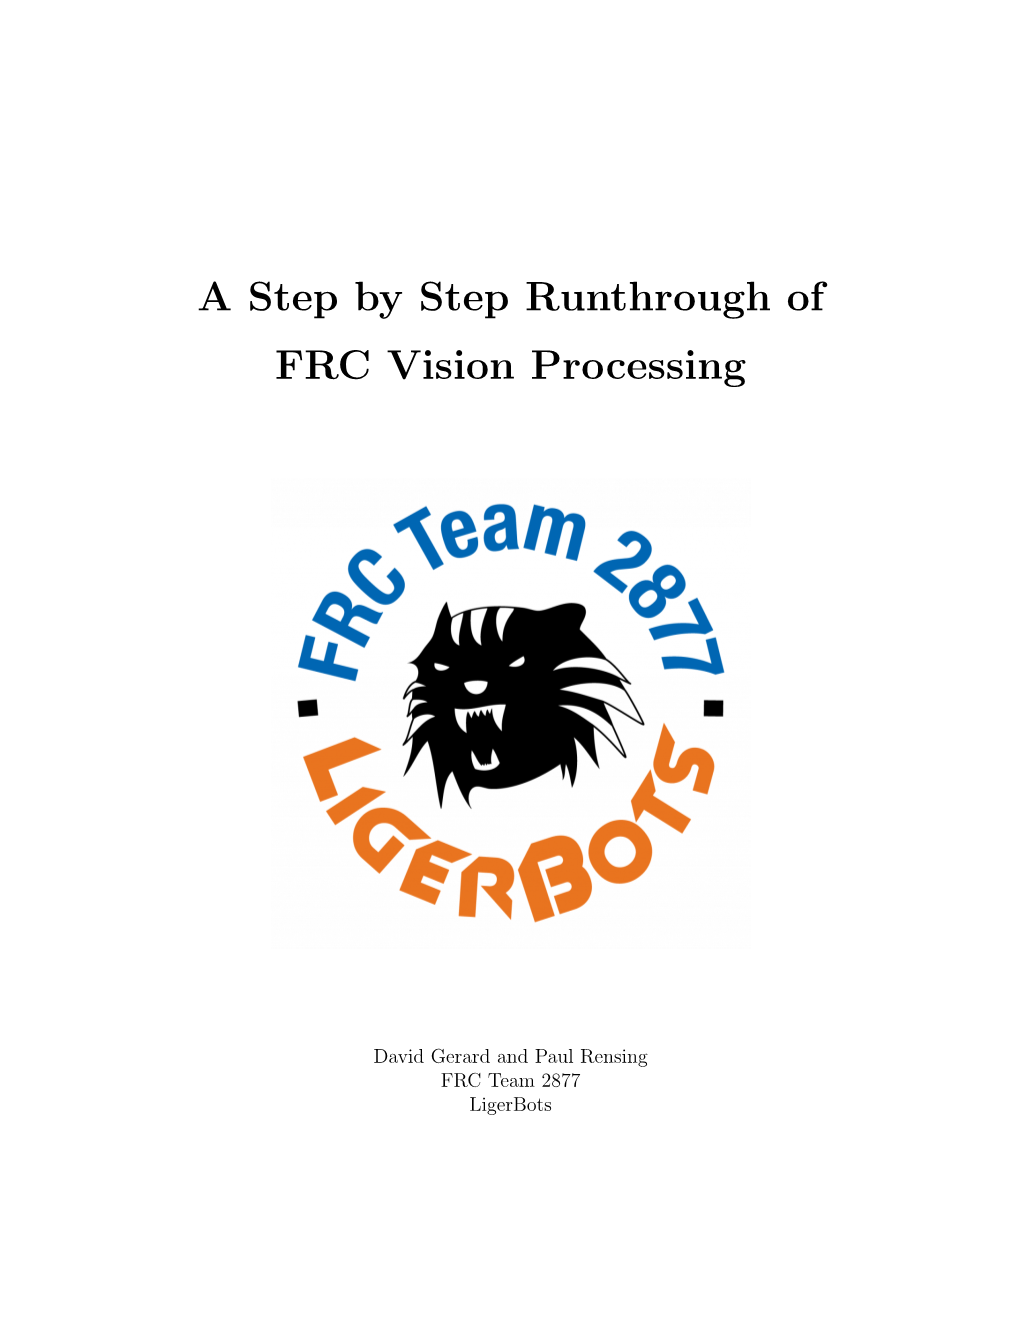 A Step by Step Runthrough of FRC Vision Processing